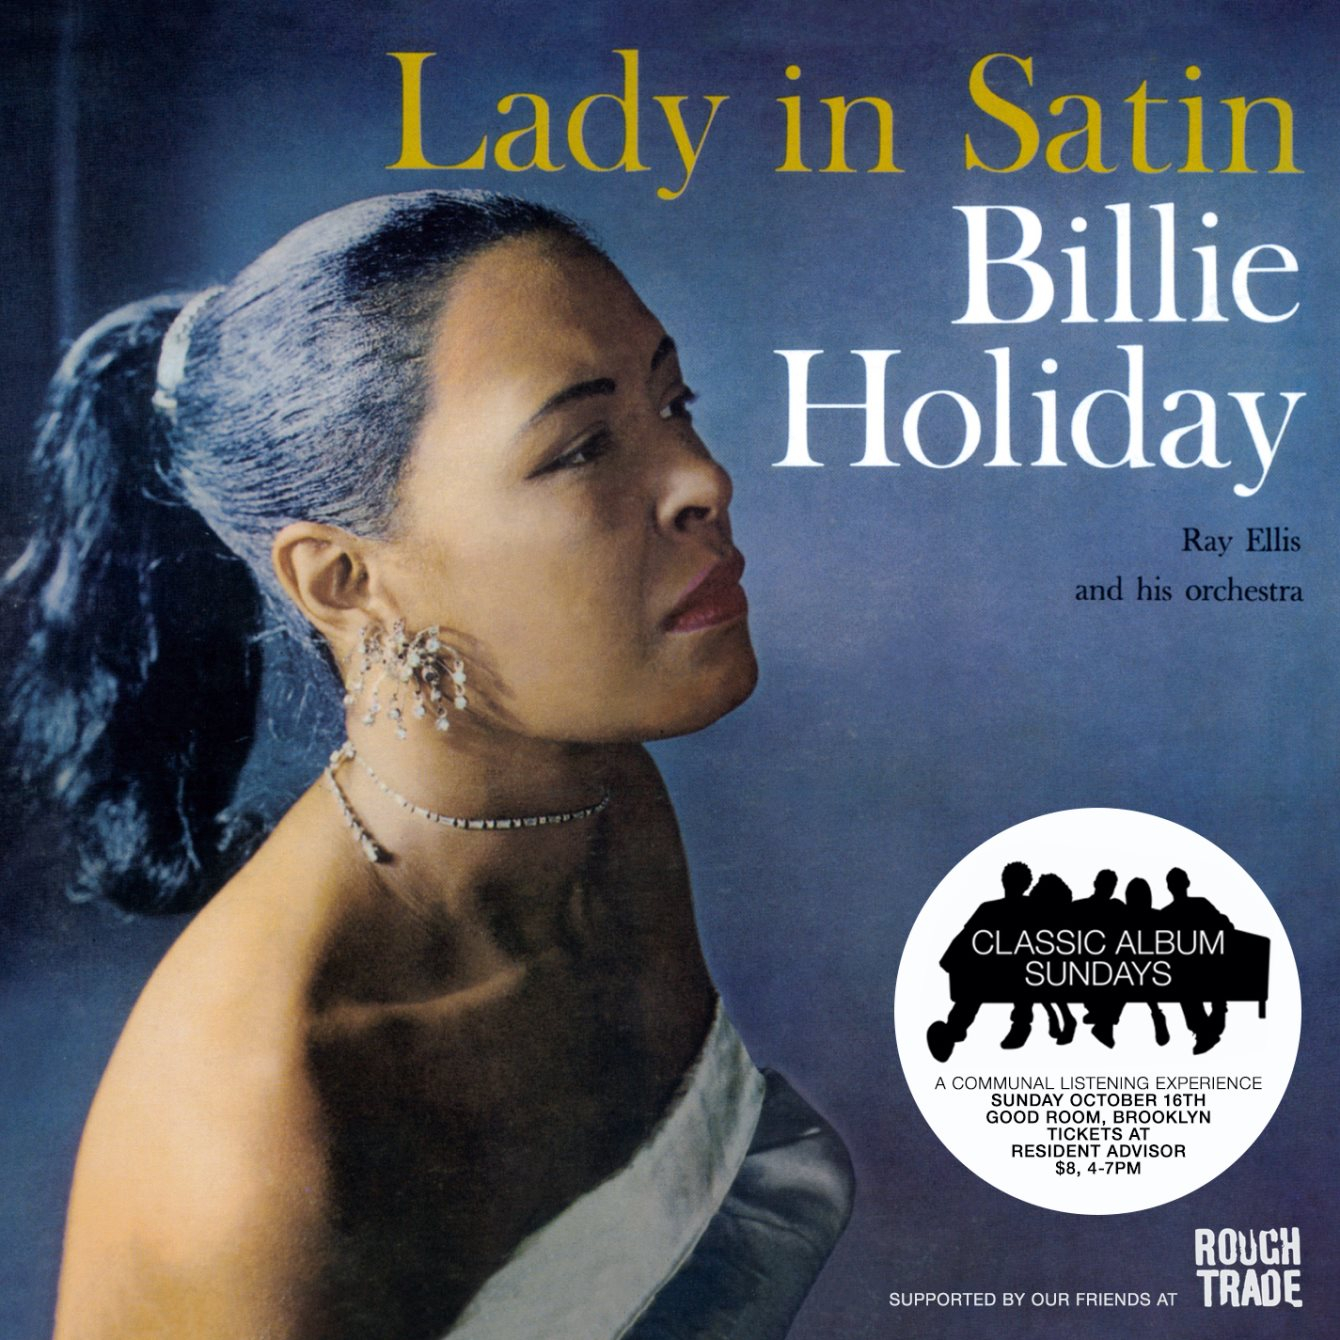 Classic Album Sundays NYC present Billie Holiday's Lady in Satin - Flyer front